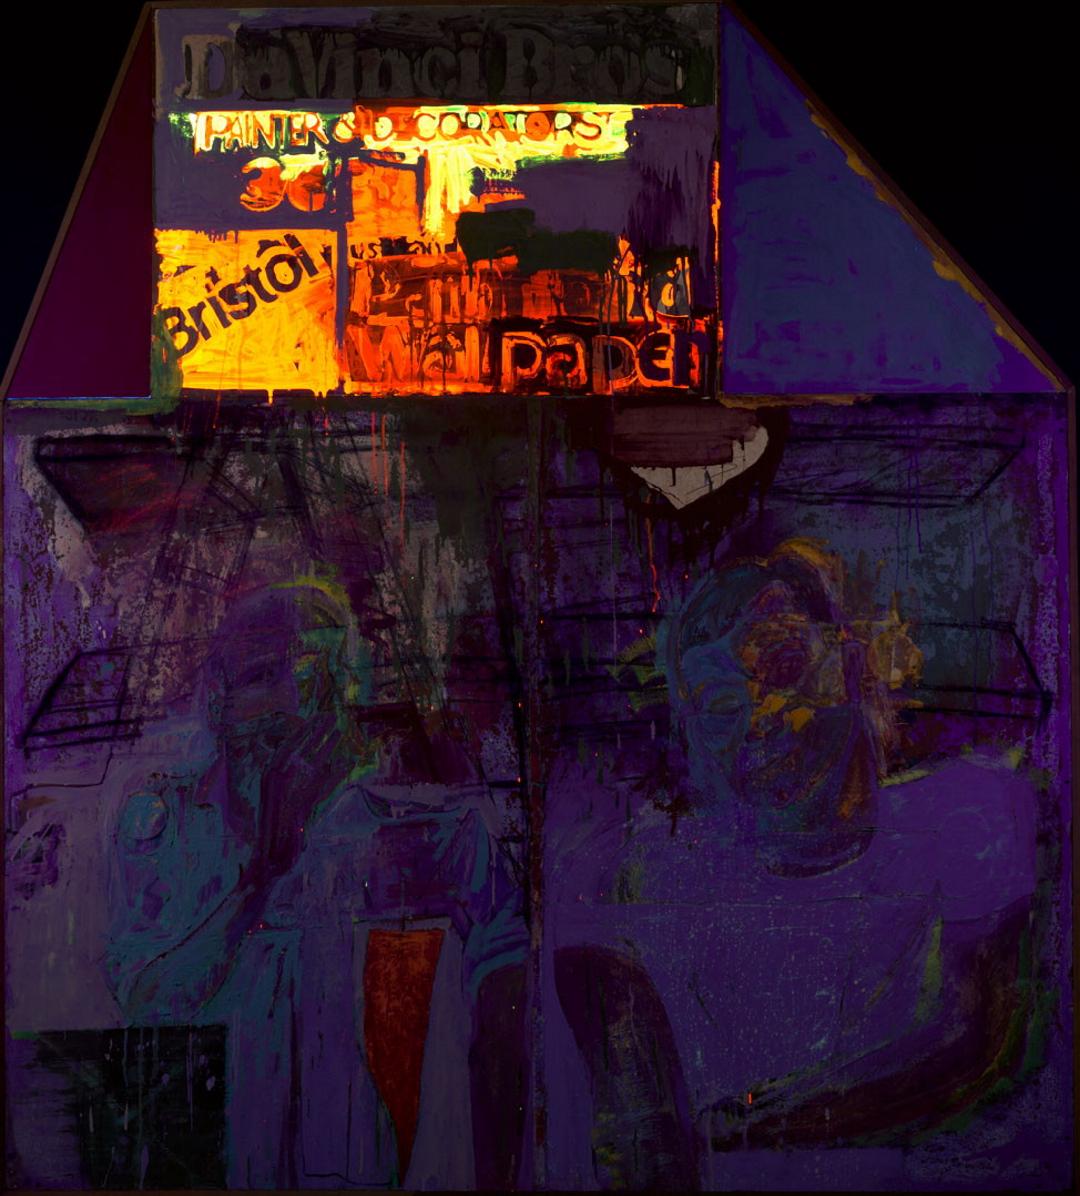 An asymmetrical oil painting on composition board of Ian Smith's 'The Da Vinci Bros. (Bob and Joe)' depicting two figures positioned underneath a sign for Da Vinci Bros, photographed under UV light.